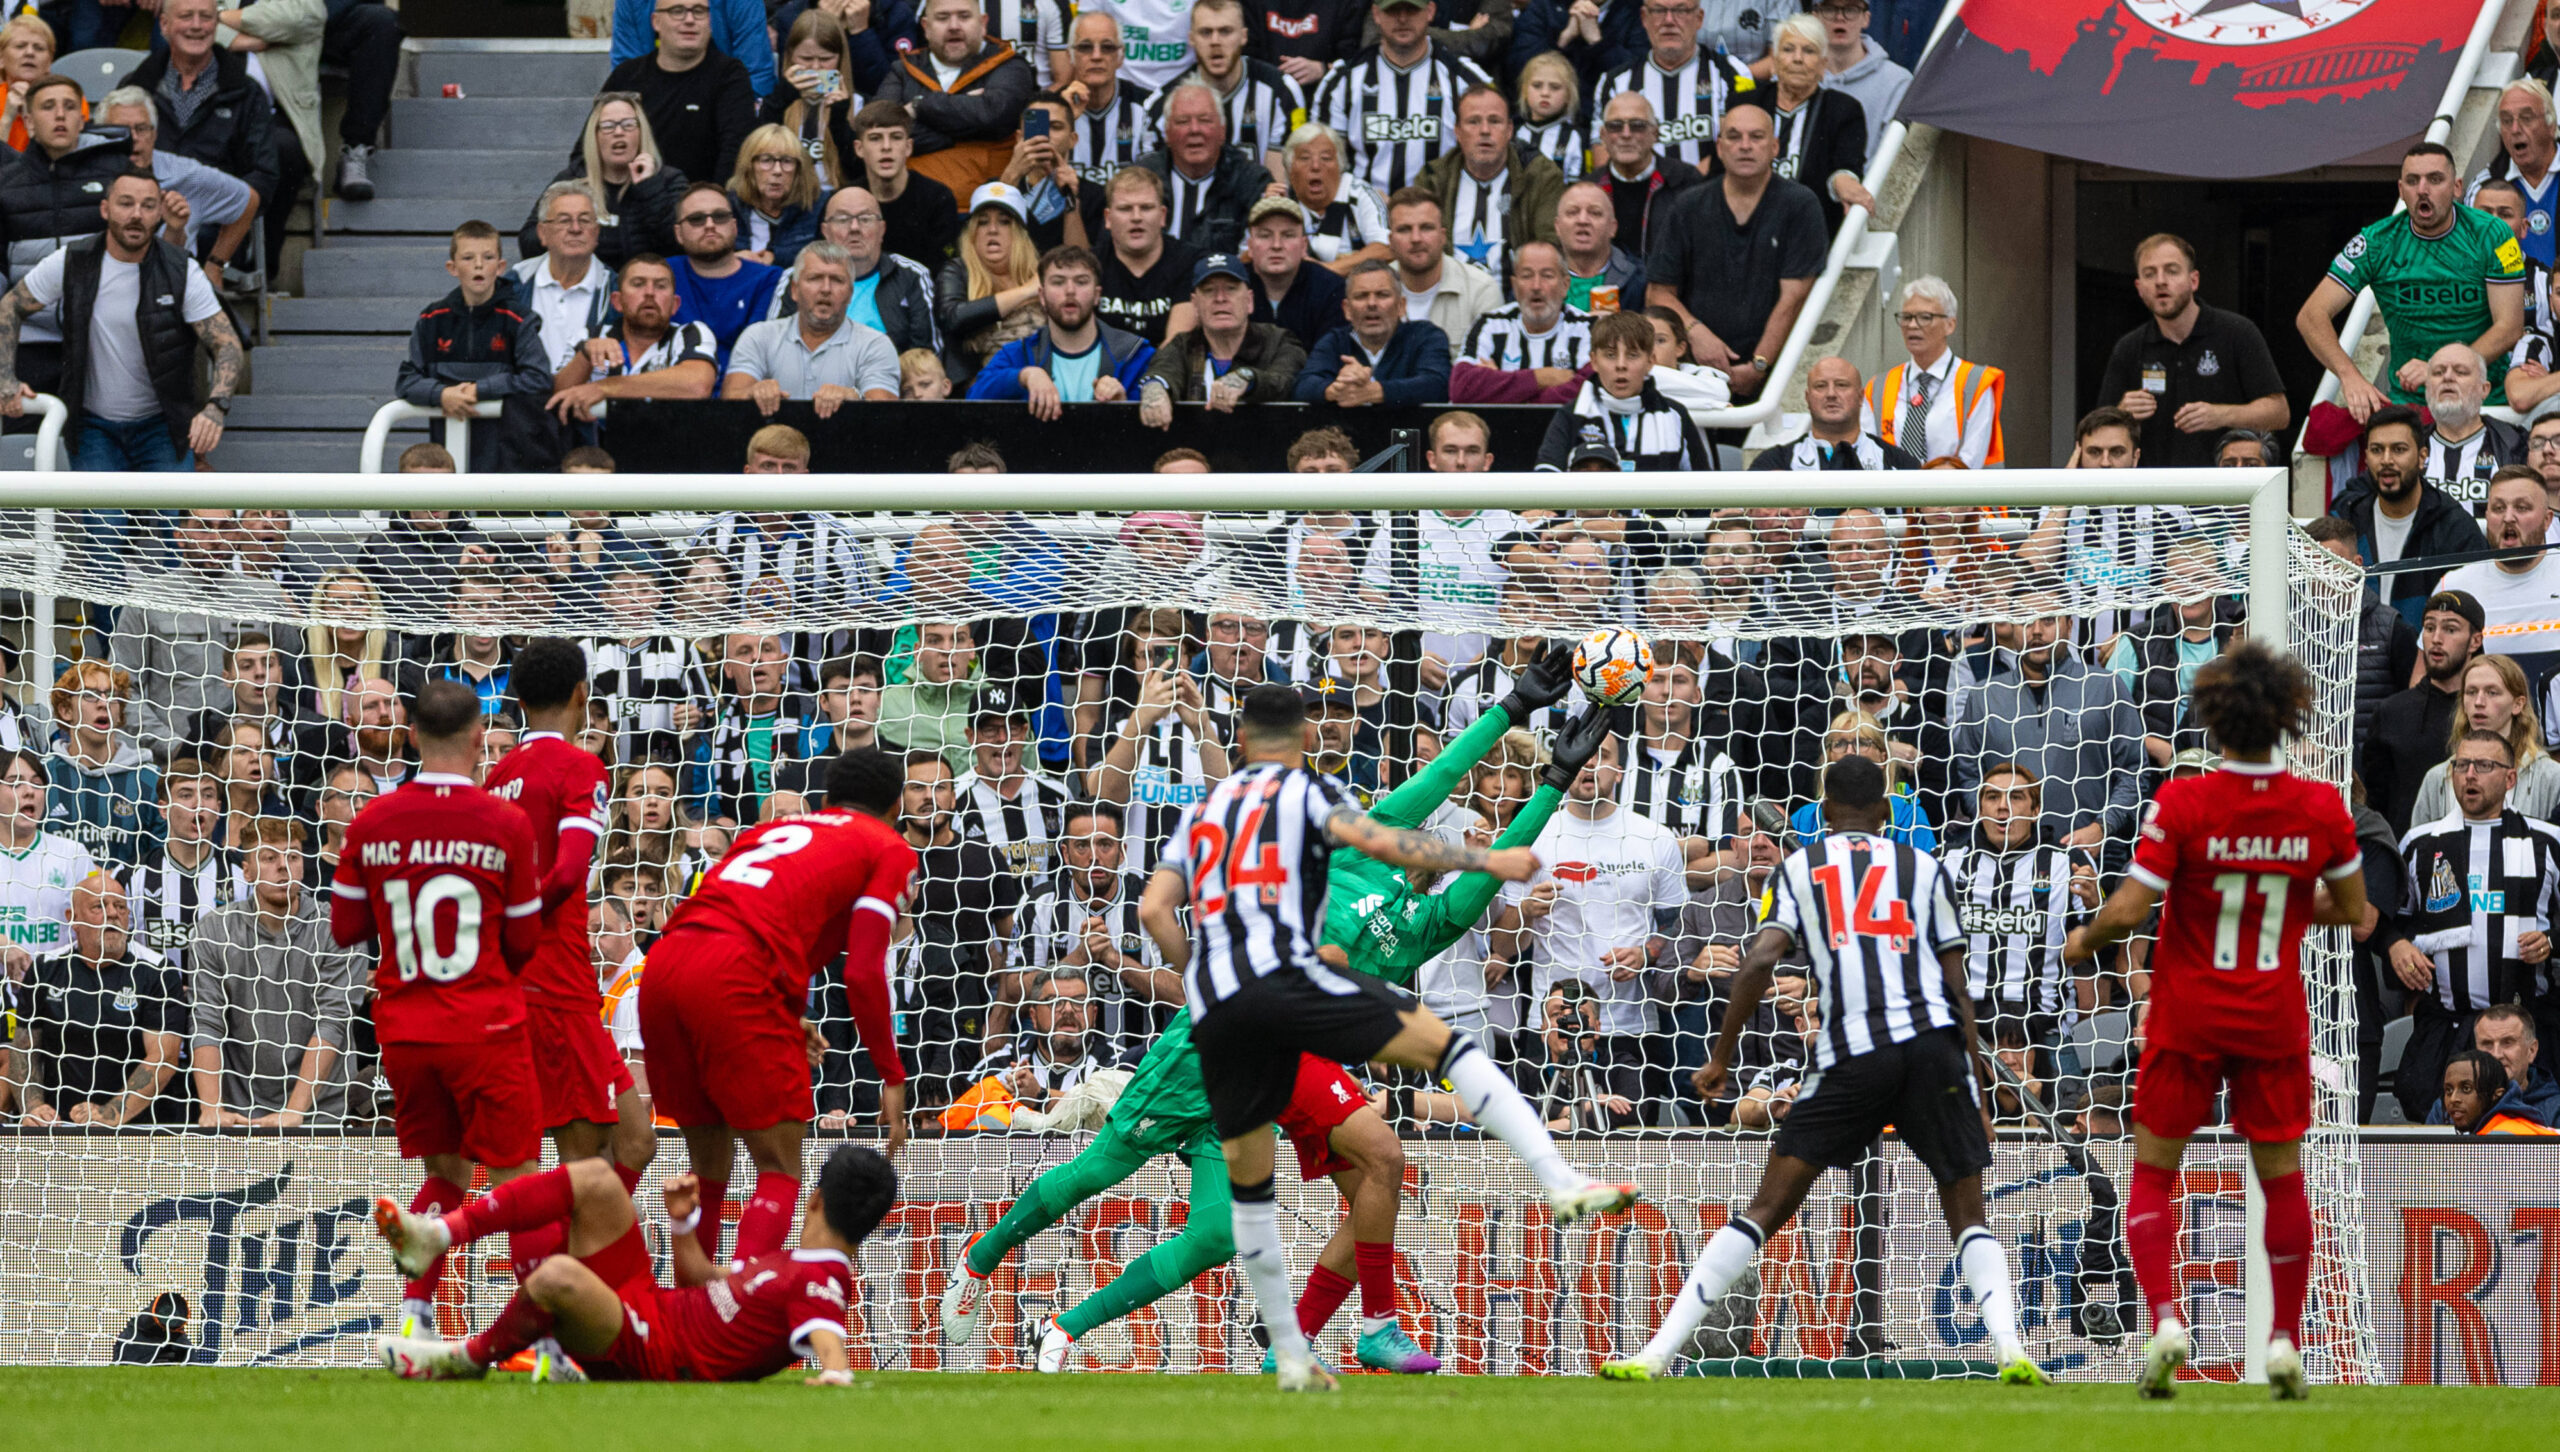 Liverpool and newcastle players watch on as a shot heads towards goal